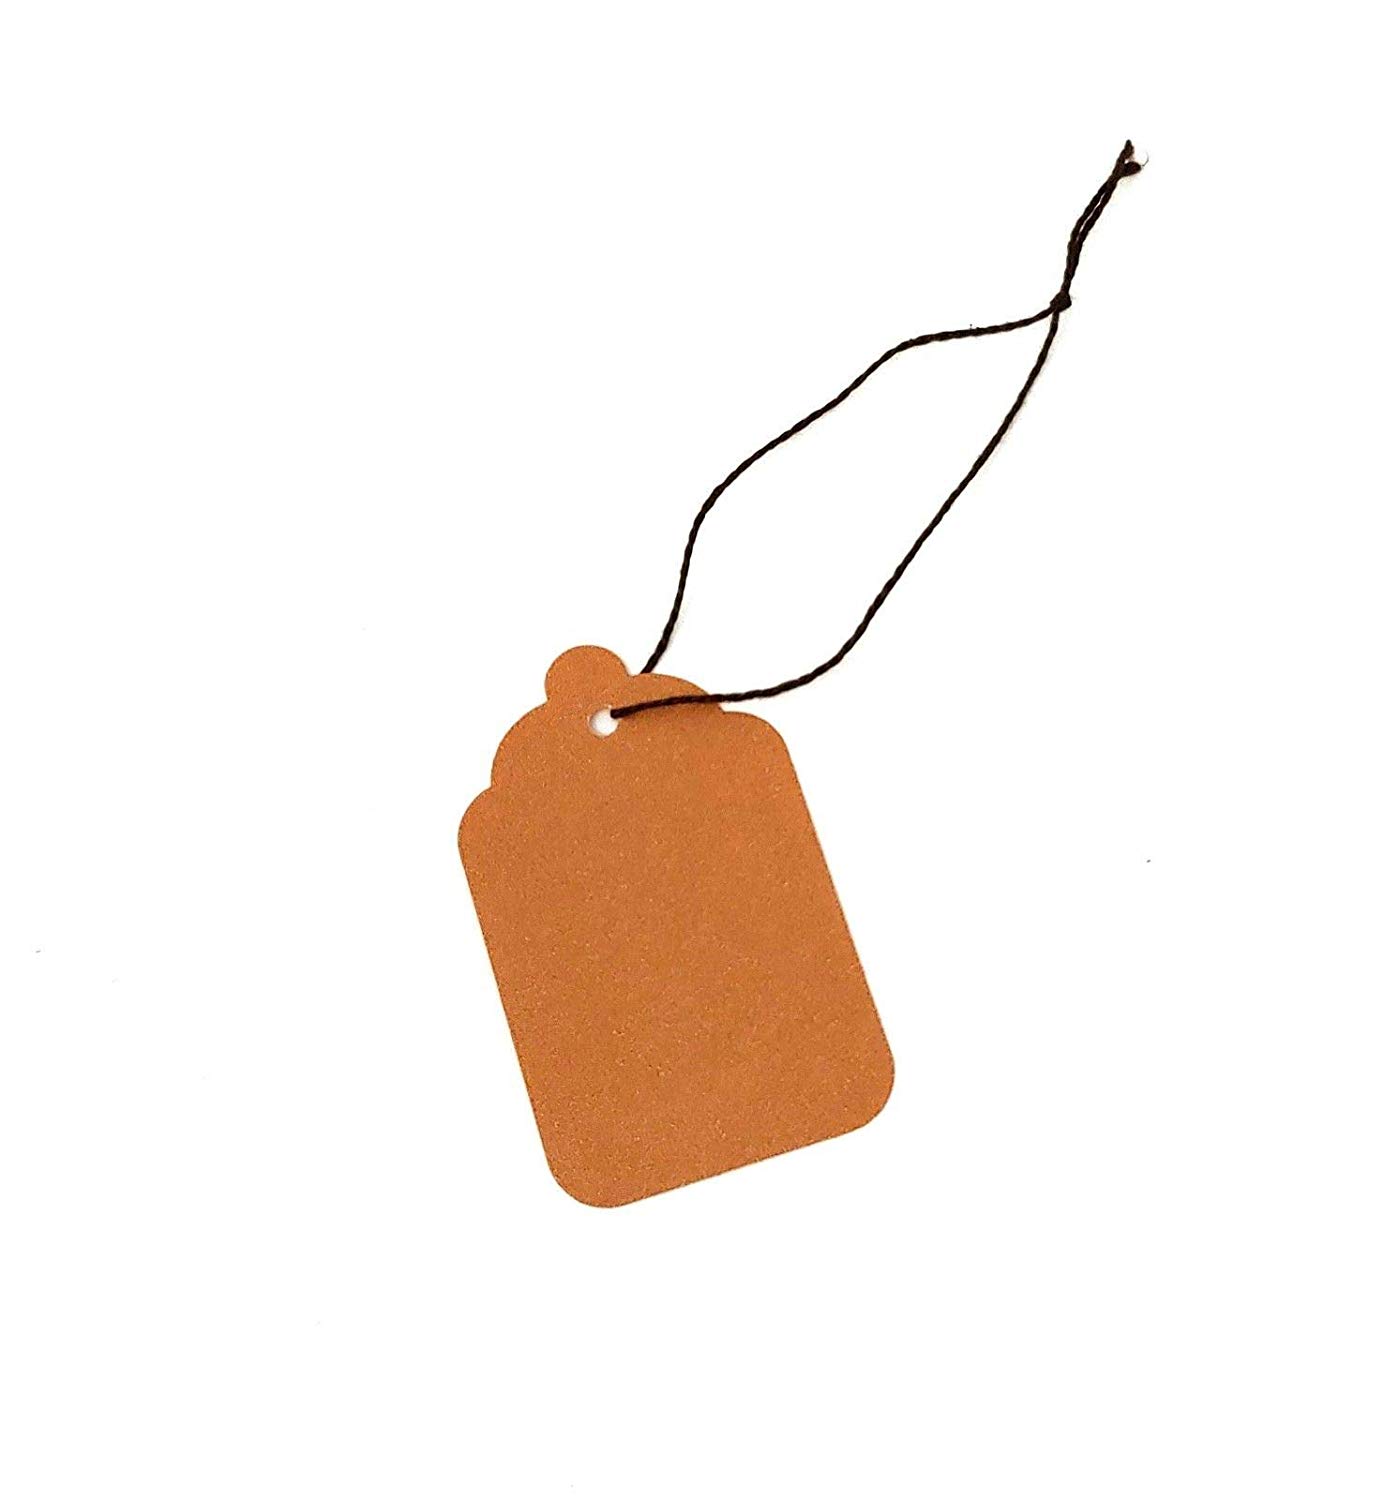 Blank Kraft Strung Merchandise Pricing Tags with String, Brown #8 Tags,  1.75 W x 2.875 H, 50 Pack 